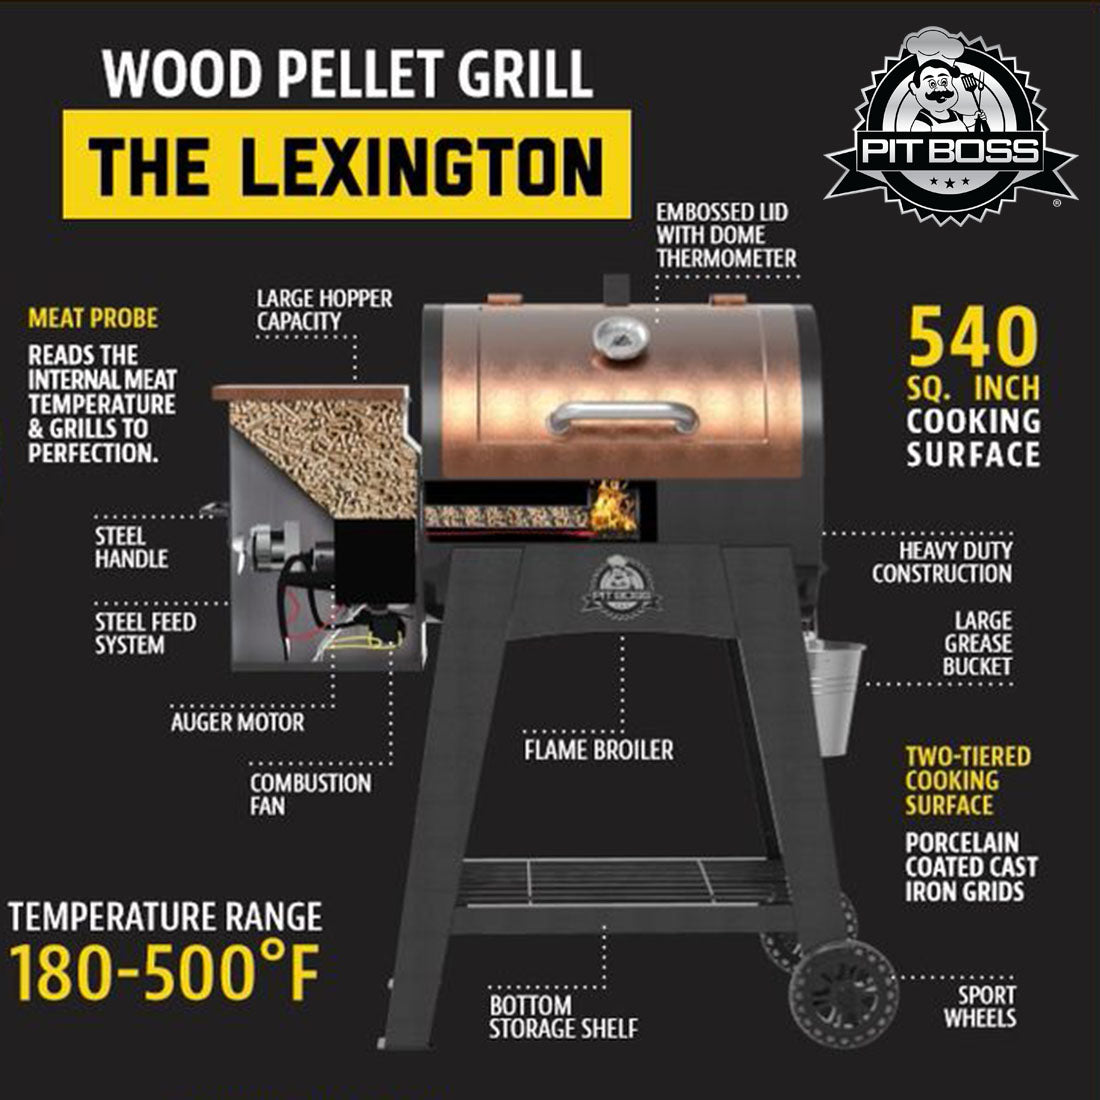 Pit Boss Lexington 540 Sq. In. Wood Pellet Grill W/ Flame Broiler and Meat Probe